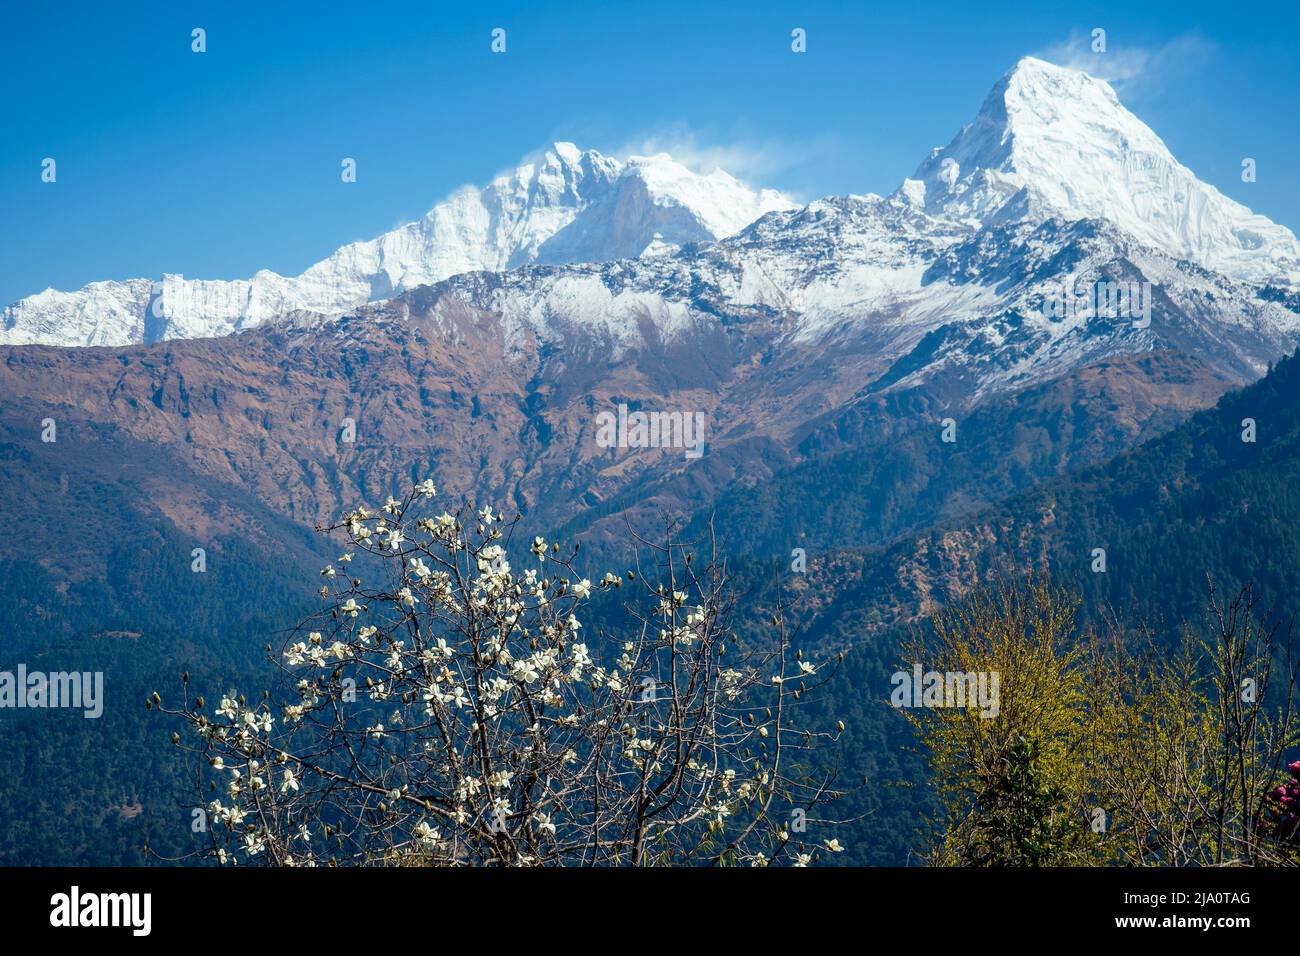 beautiful view of the landscape of the Himalayan mountains. Snow-covered mountain tops and flowering trees. trekking concept in the mountains Stock Photo